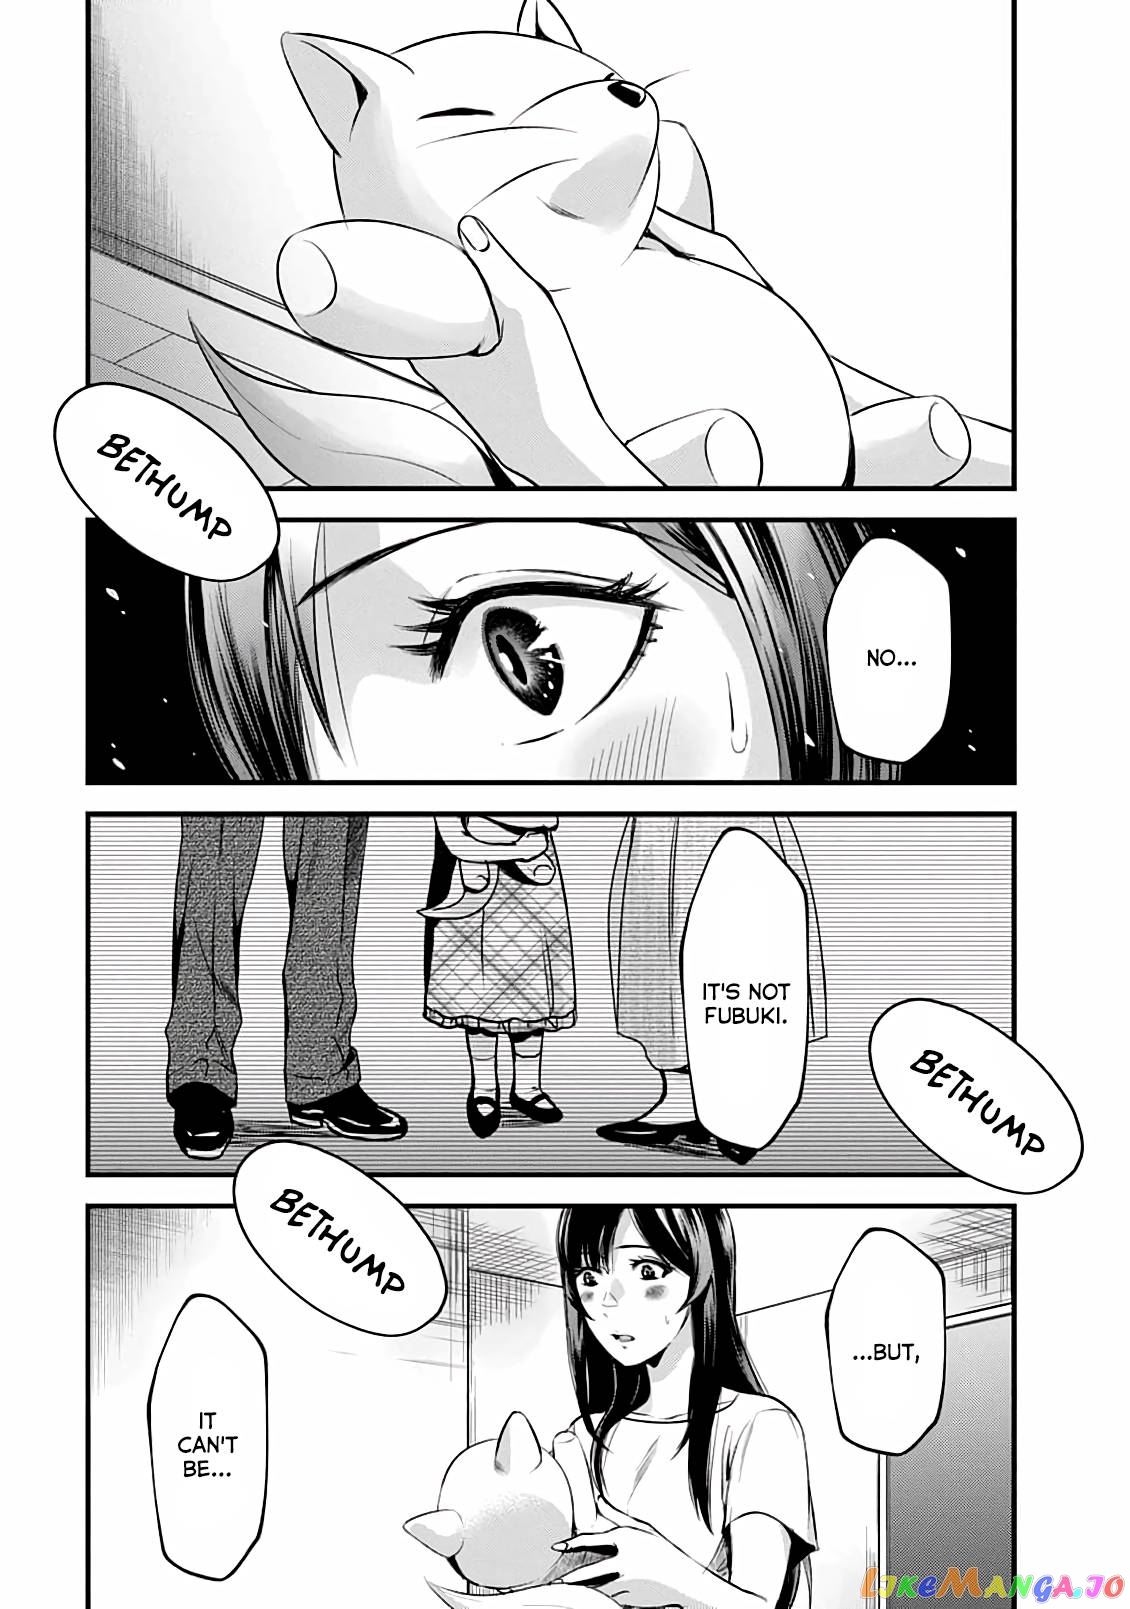 It's Fun Having a 300,000 yen a Month Job Welcoming Home an Onee-san Who Doesn't Find Meaning in a Job That Pays Her 500,000 yen a Month chapter 11 - page 11